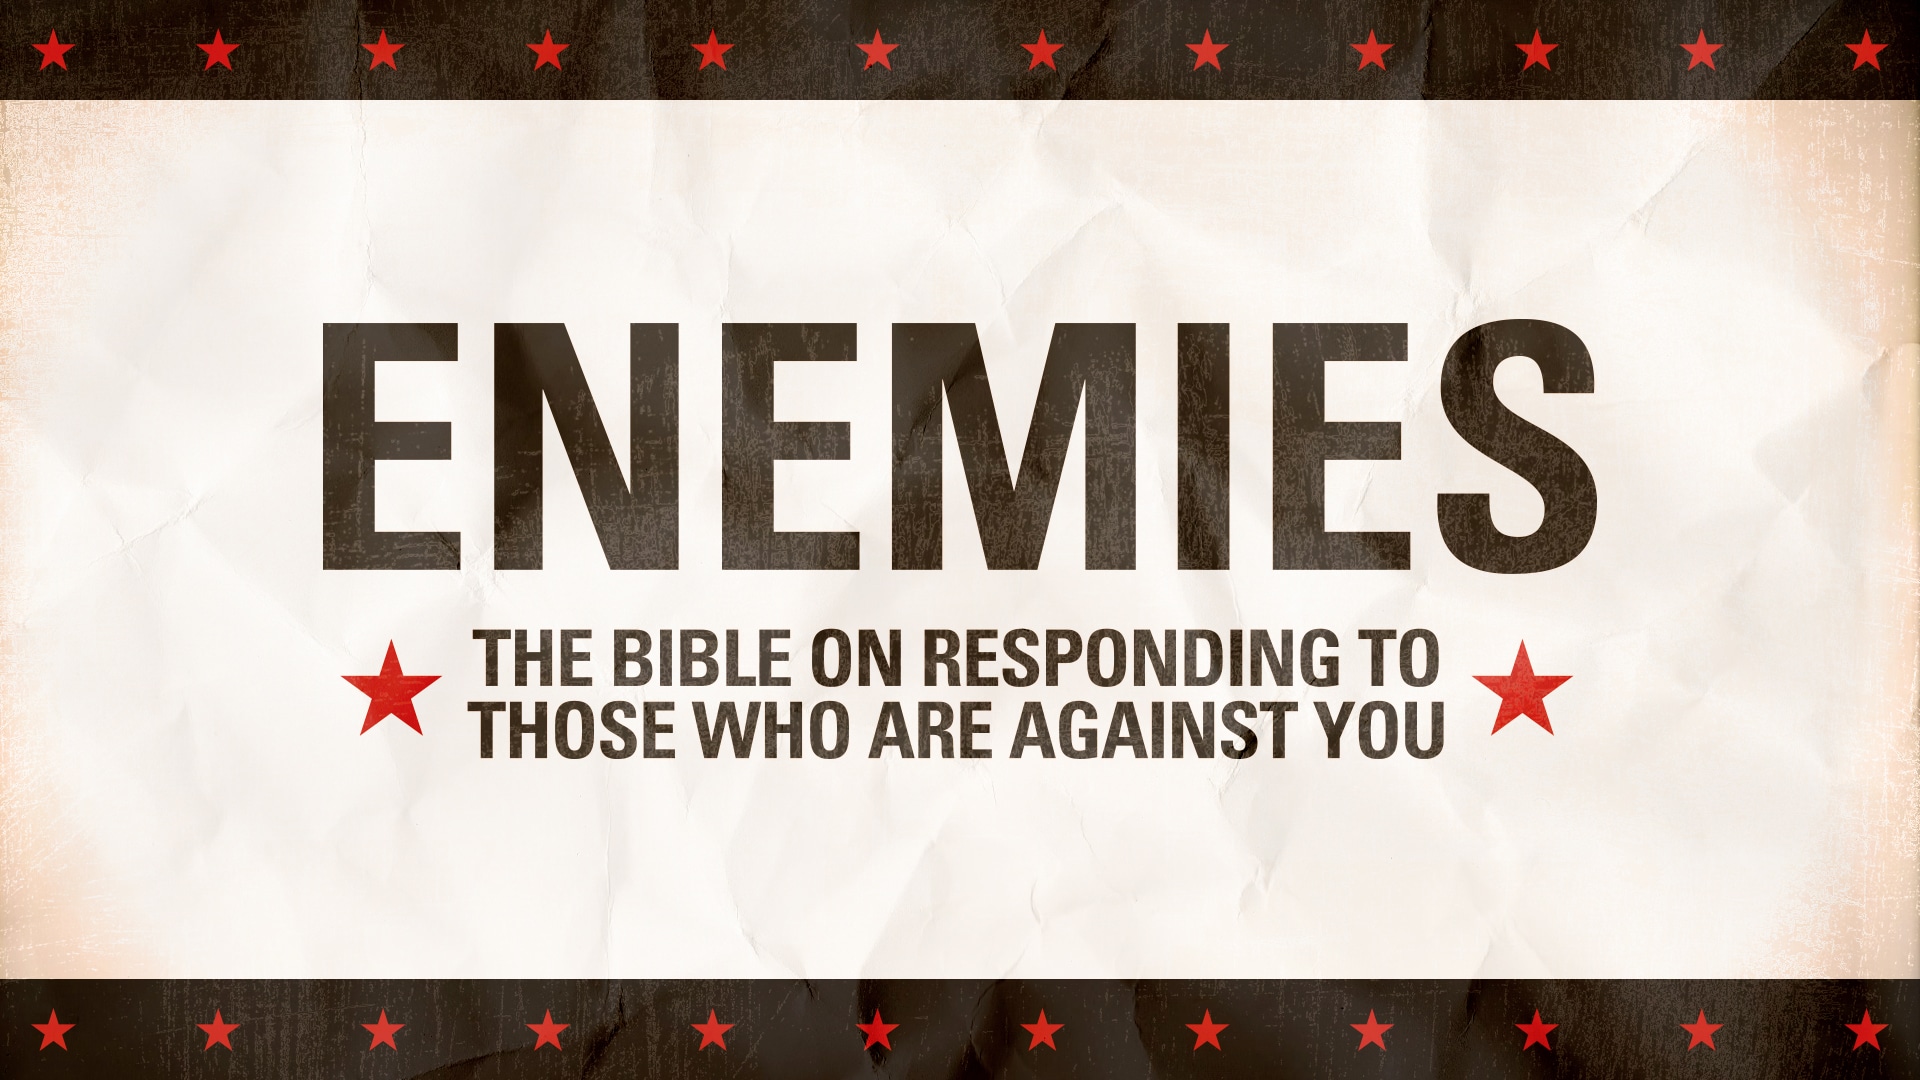 Featured image for “Enemies”